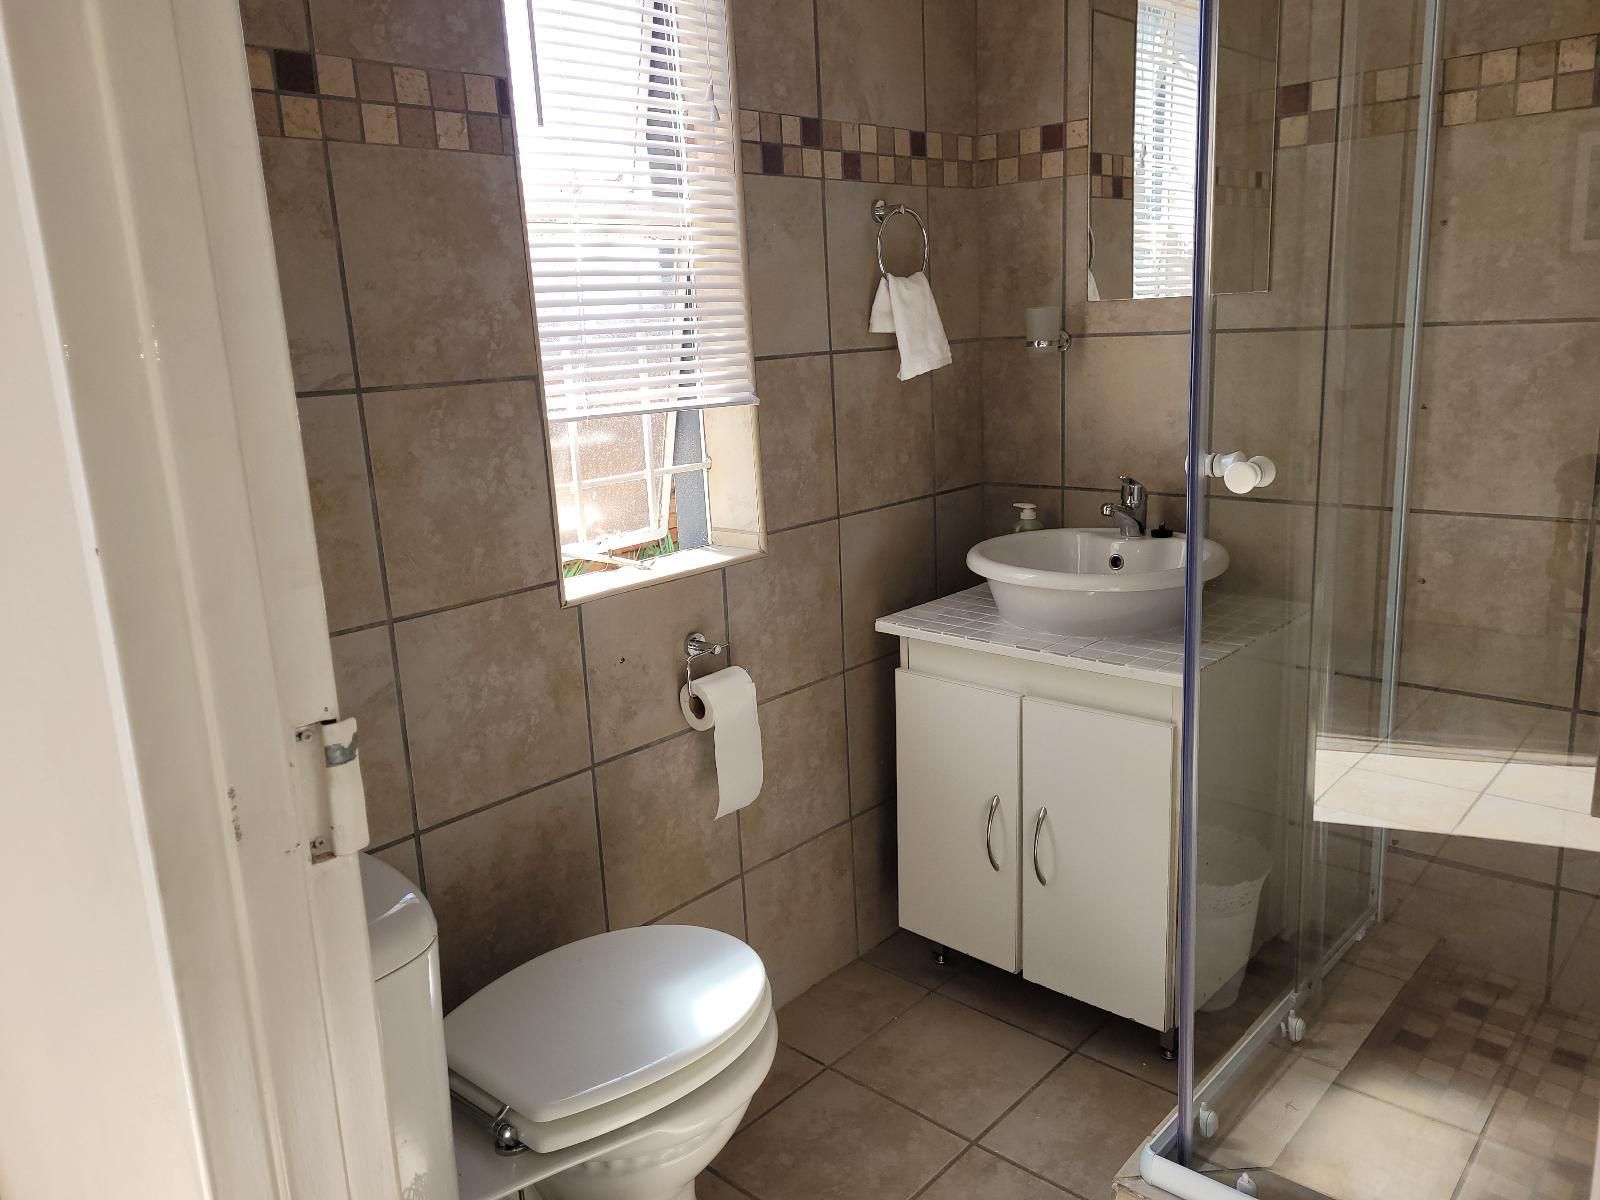 Potch Best Rest Potchefstroom North West Province South Africa Bathroom